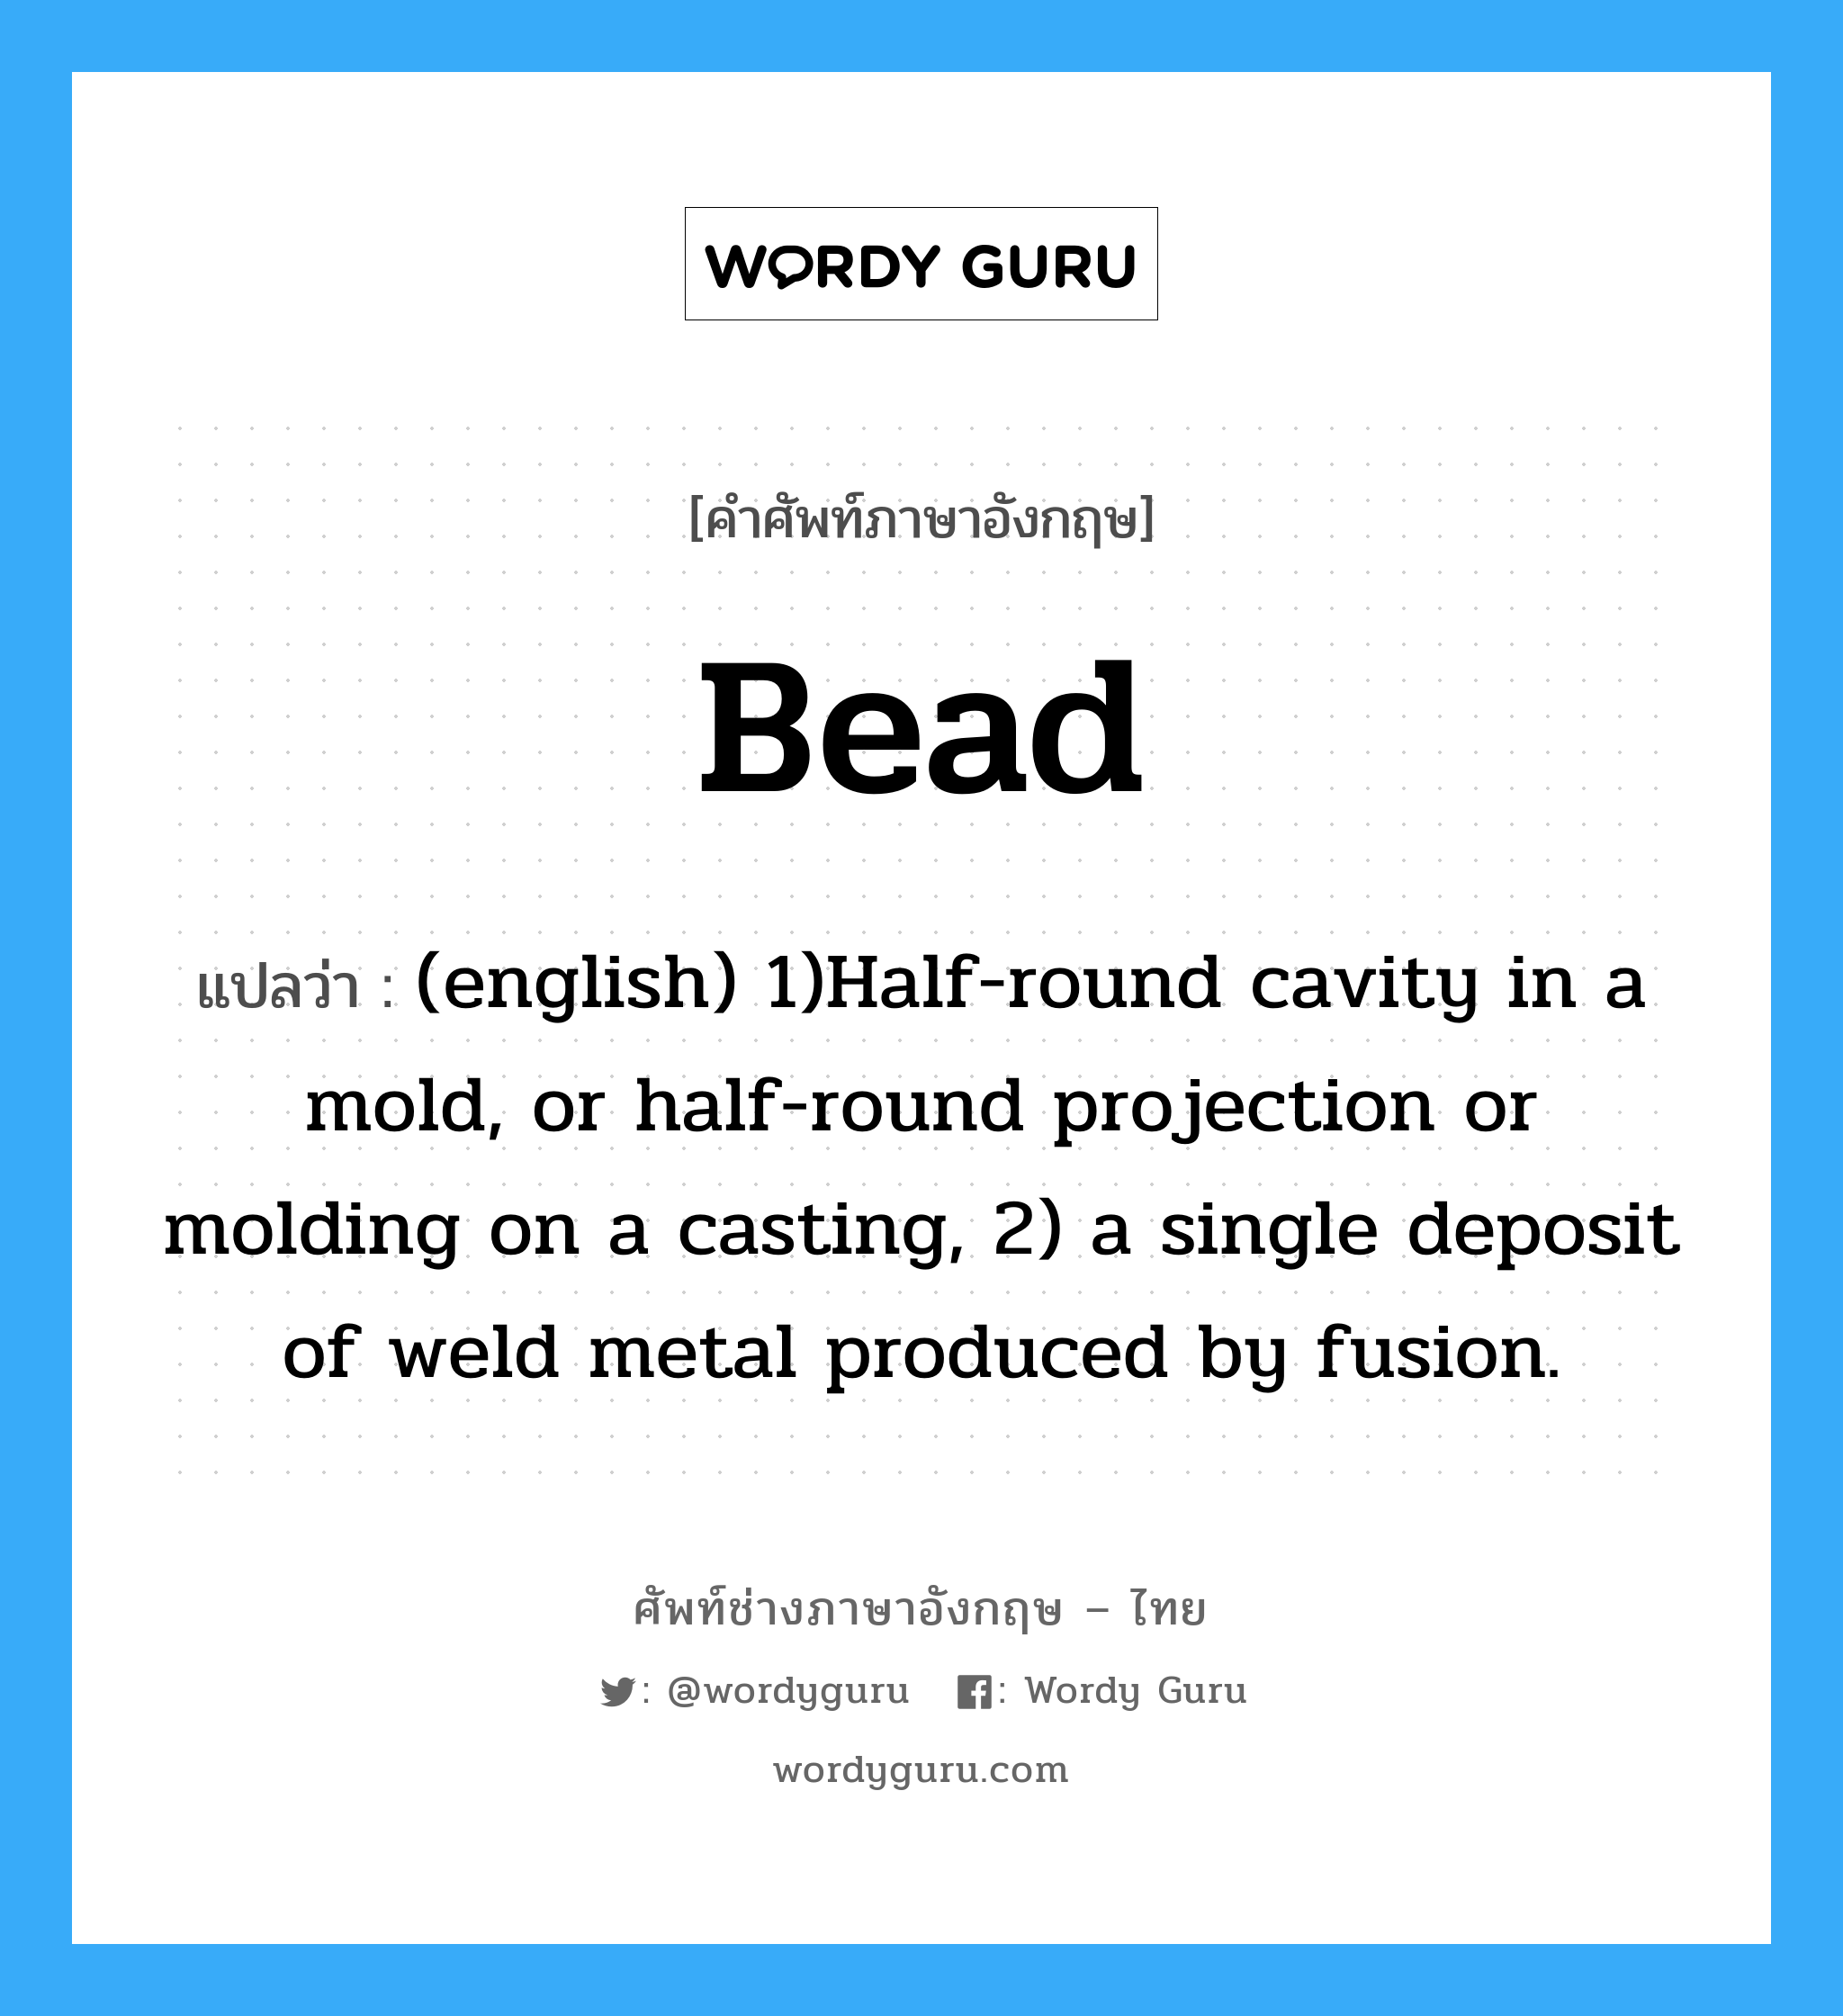 Bead แปลว่า?, คำศัพท์ช่างภาษาอังกฤษ - ไทย Bead คำศัพท์ภาษาอังกฤษ Bead แปลว่า (english) 1)Half-round cavity in a mold, or half-round projection or molding on a casting, 2) a single deposit of weld metal produced by fusion.